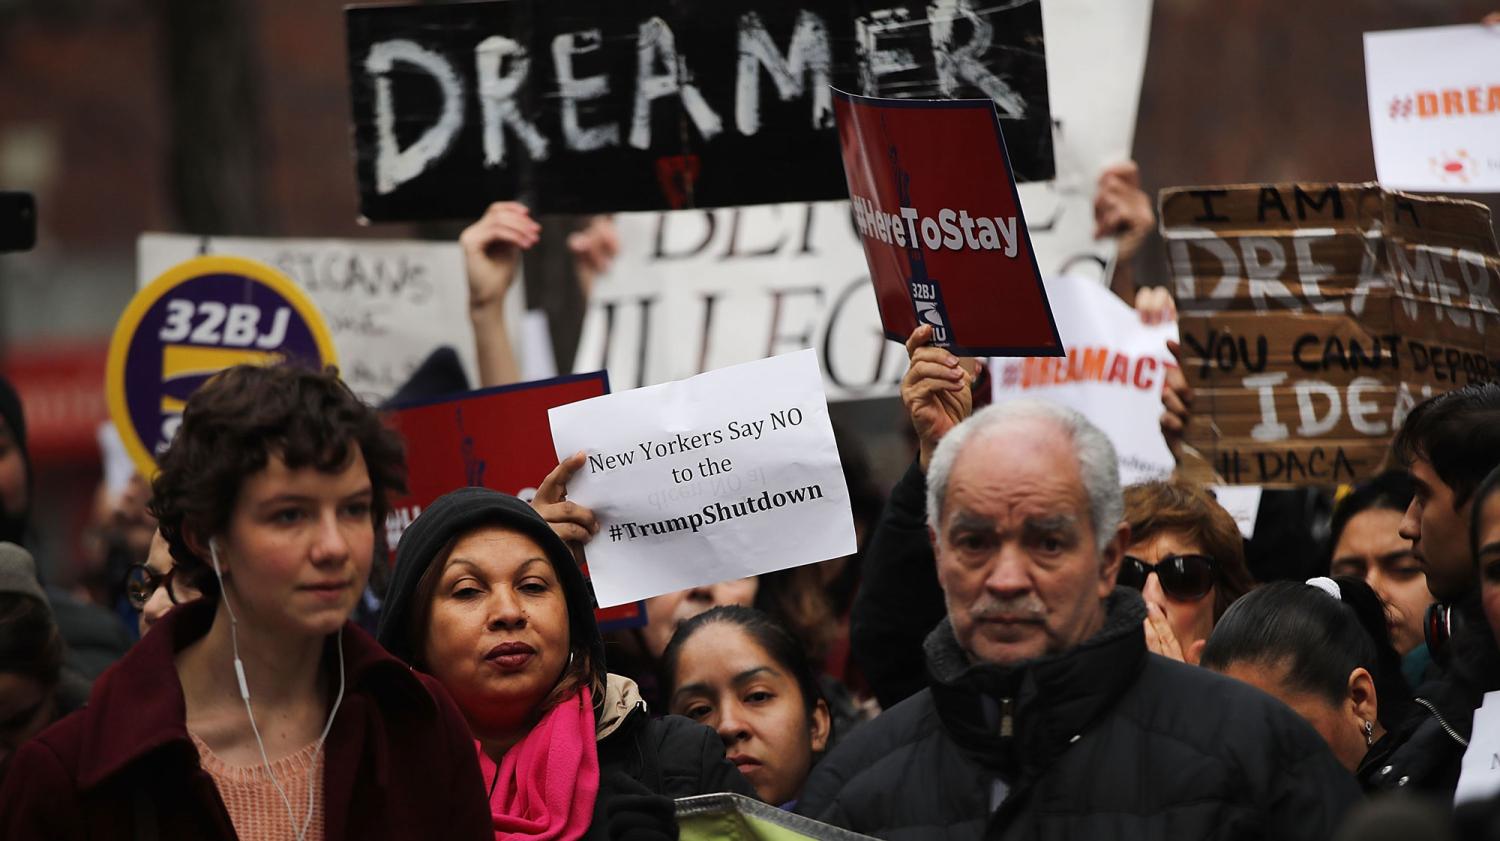 Activists In New York Protest Government Shutdown  (Photo by Spencer Platt/Getty Images)